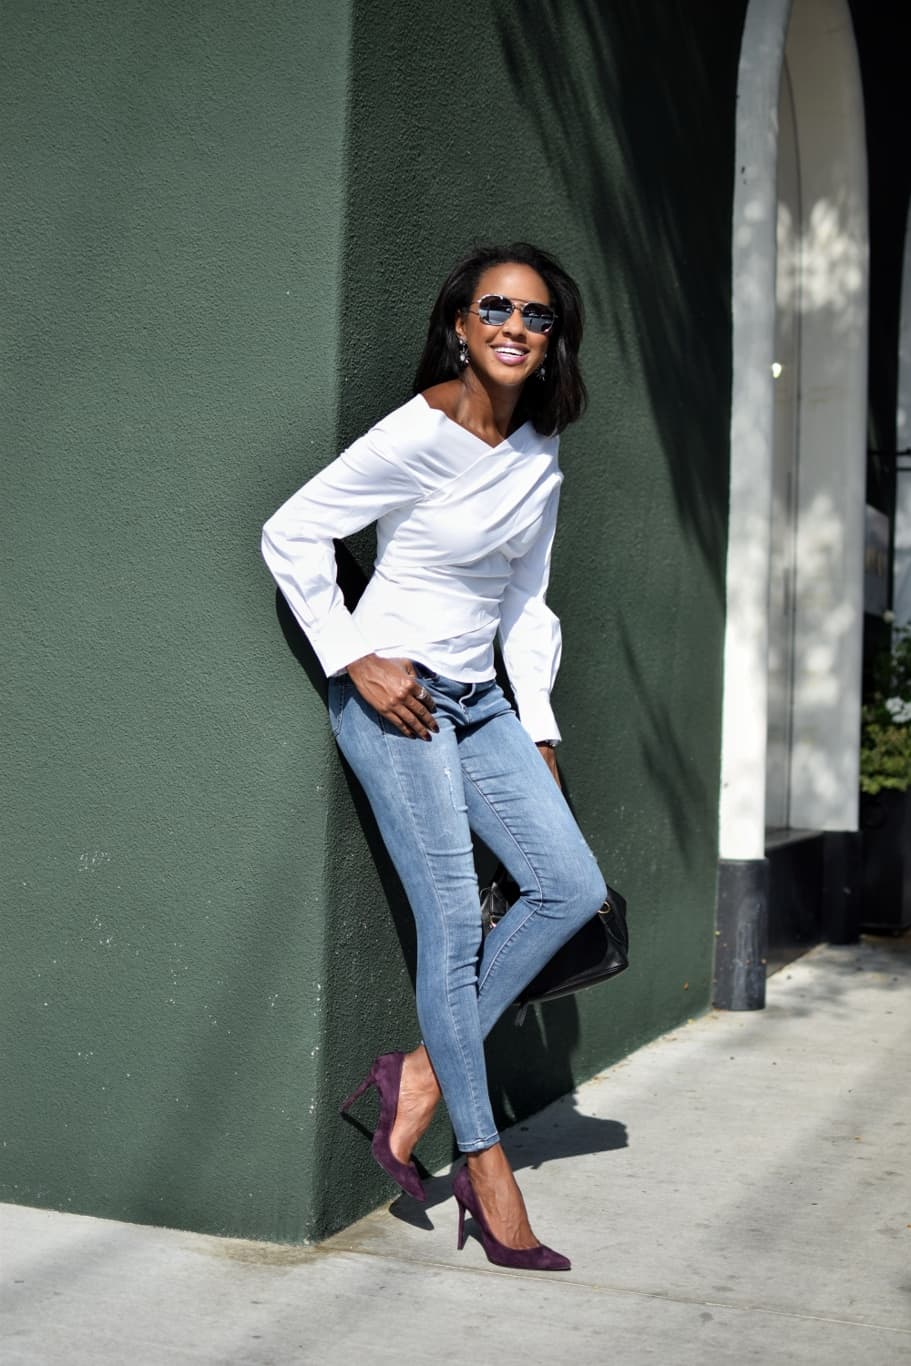 Theory Blouse and Democracy Denim | BusyWifeBusylife.com